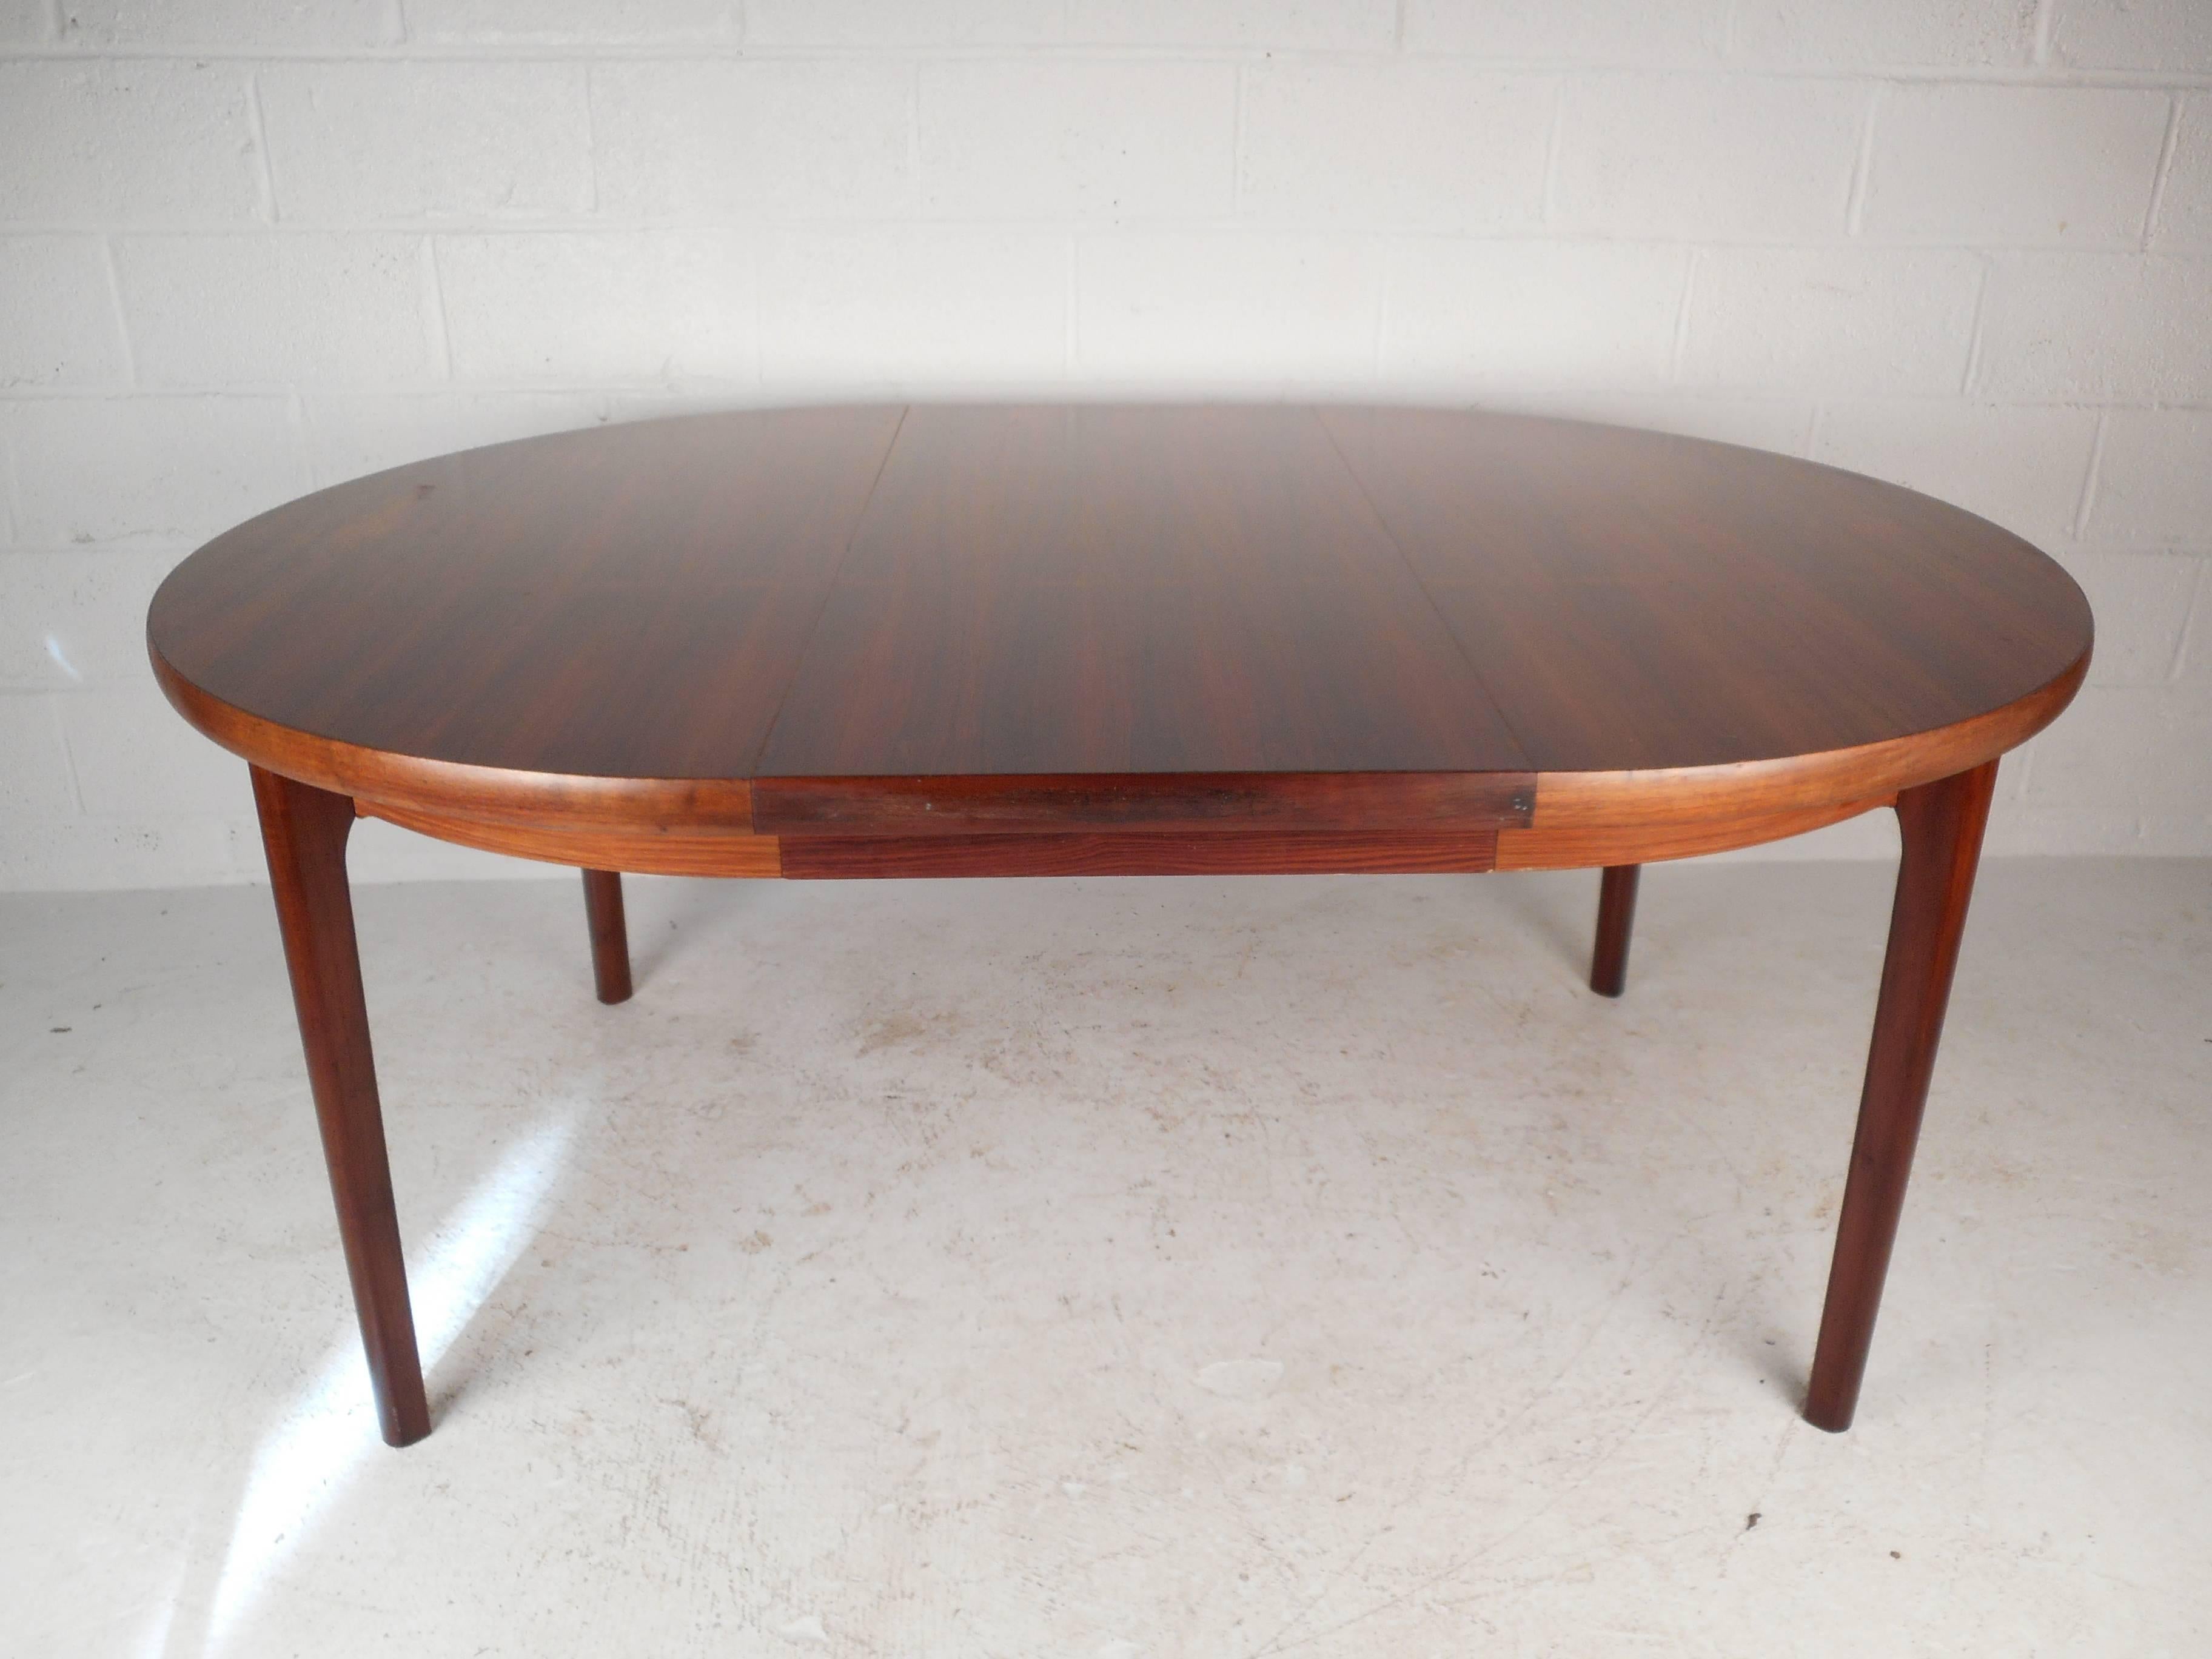 Gorgeous vintage modern rosewood dining table features unique rounded edges and one leaf to extend to 68